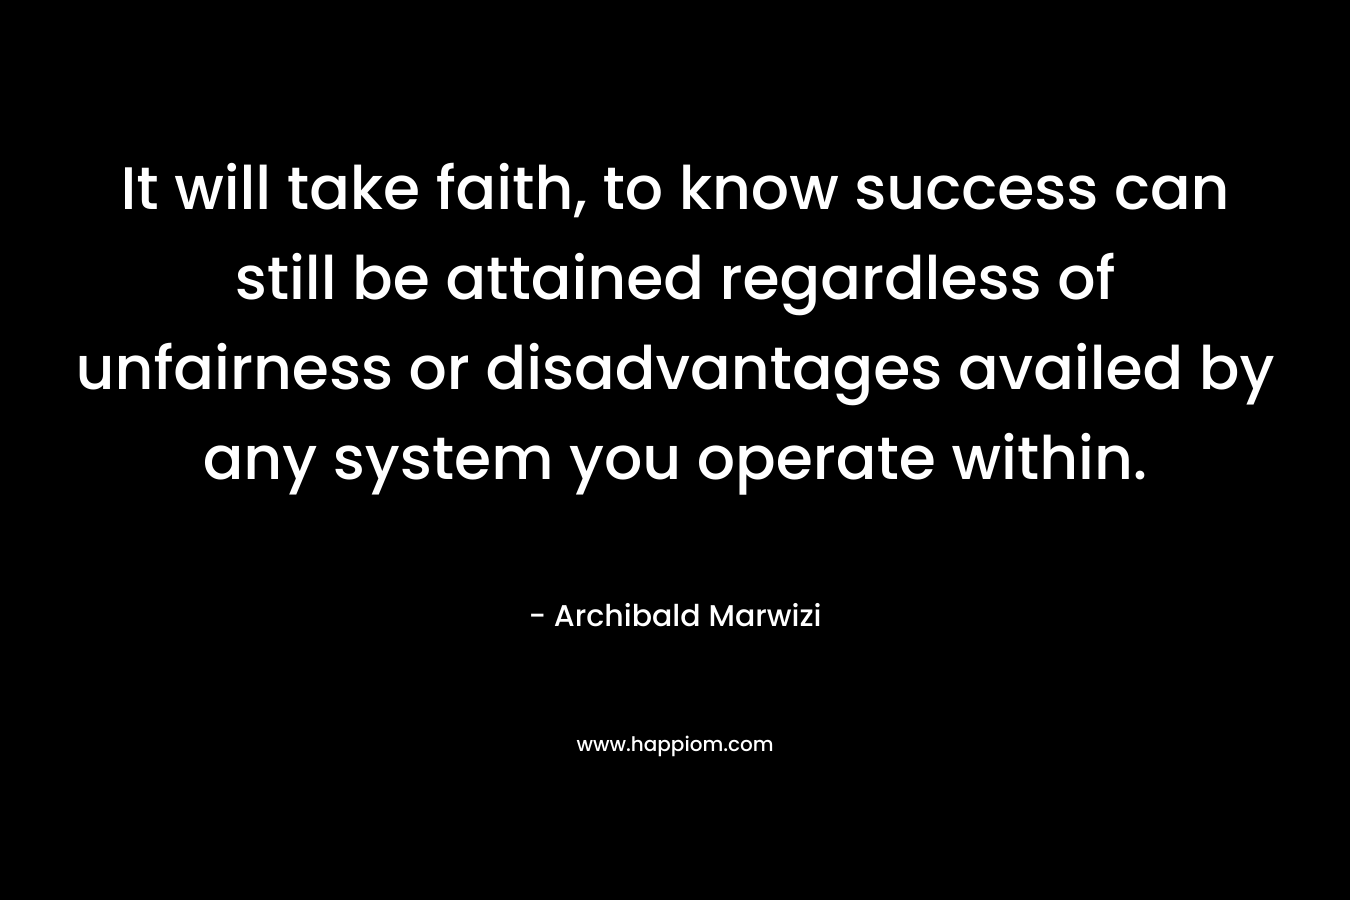 It will take faith, to know success can still be attained regardless of unfairness or disadvantages availed by any system you operate within.